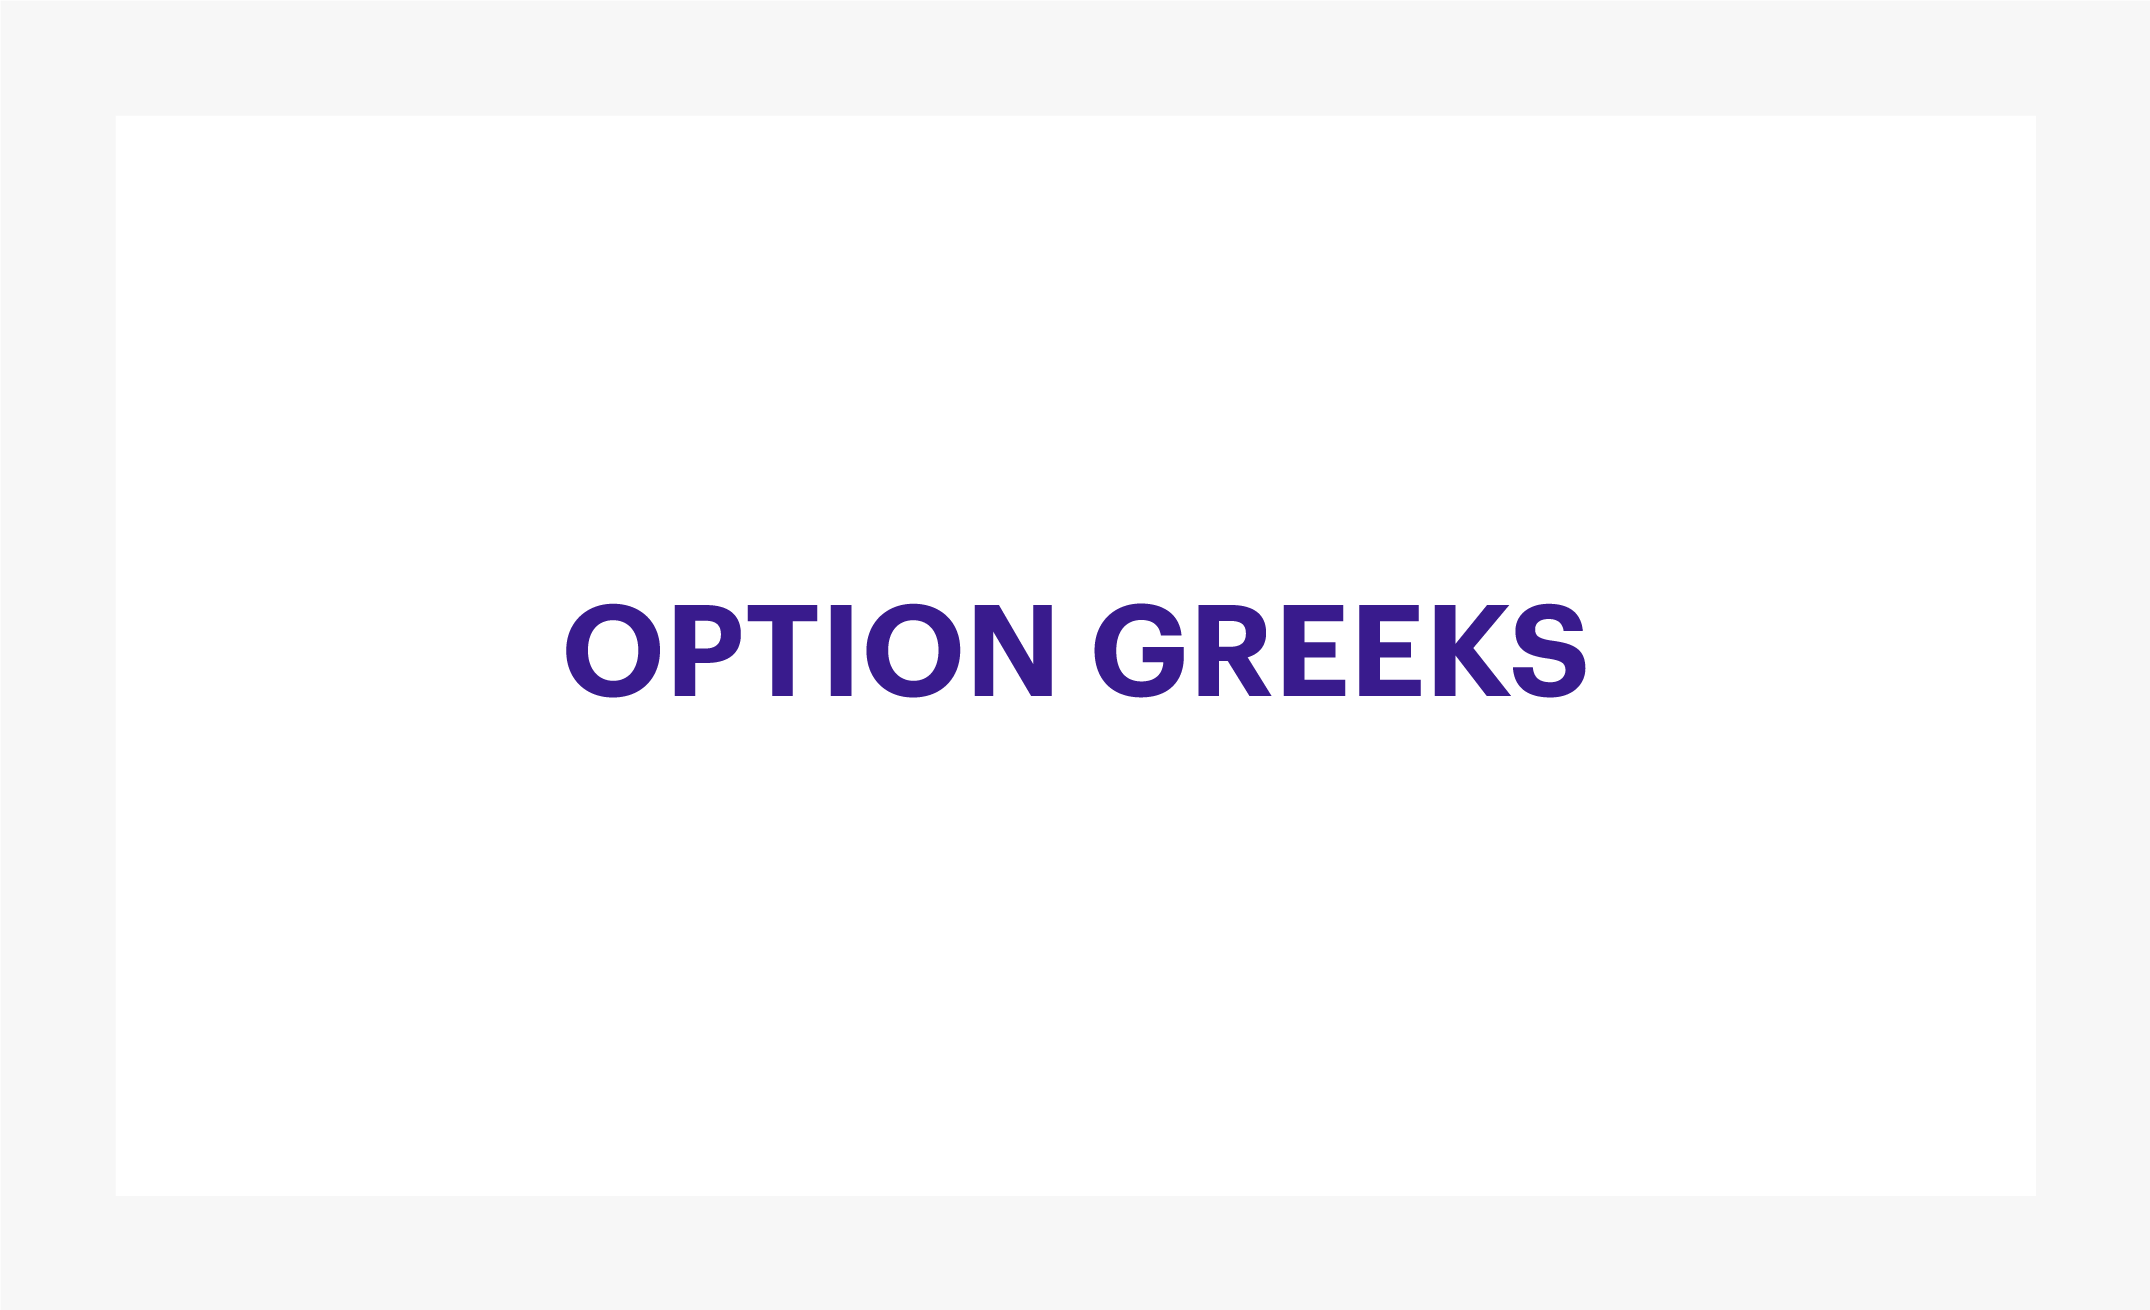 Learn more about options greeks